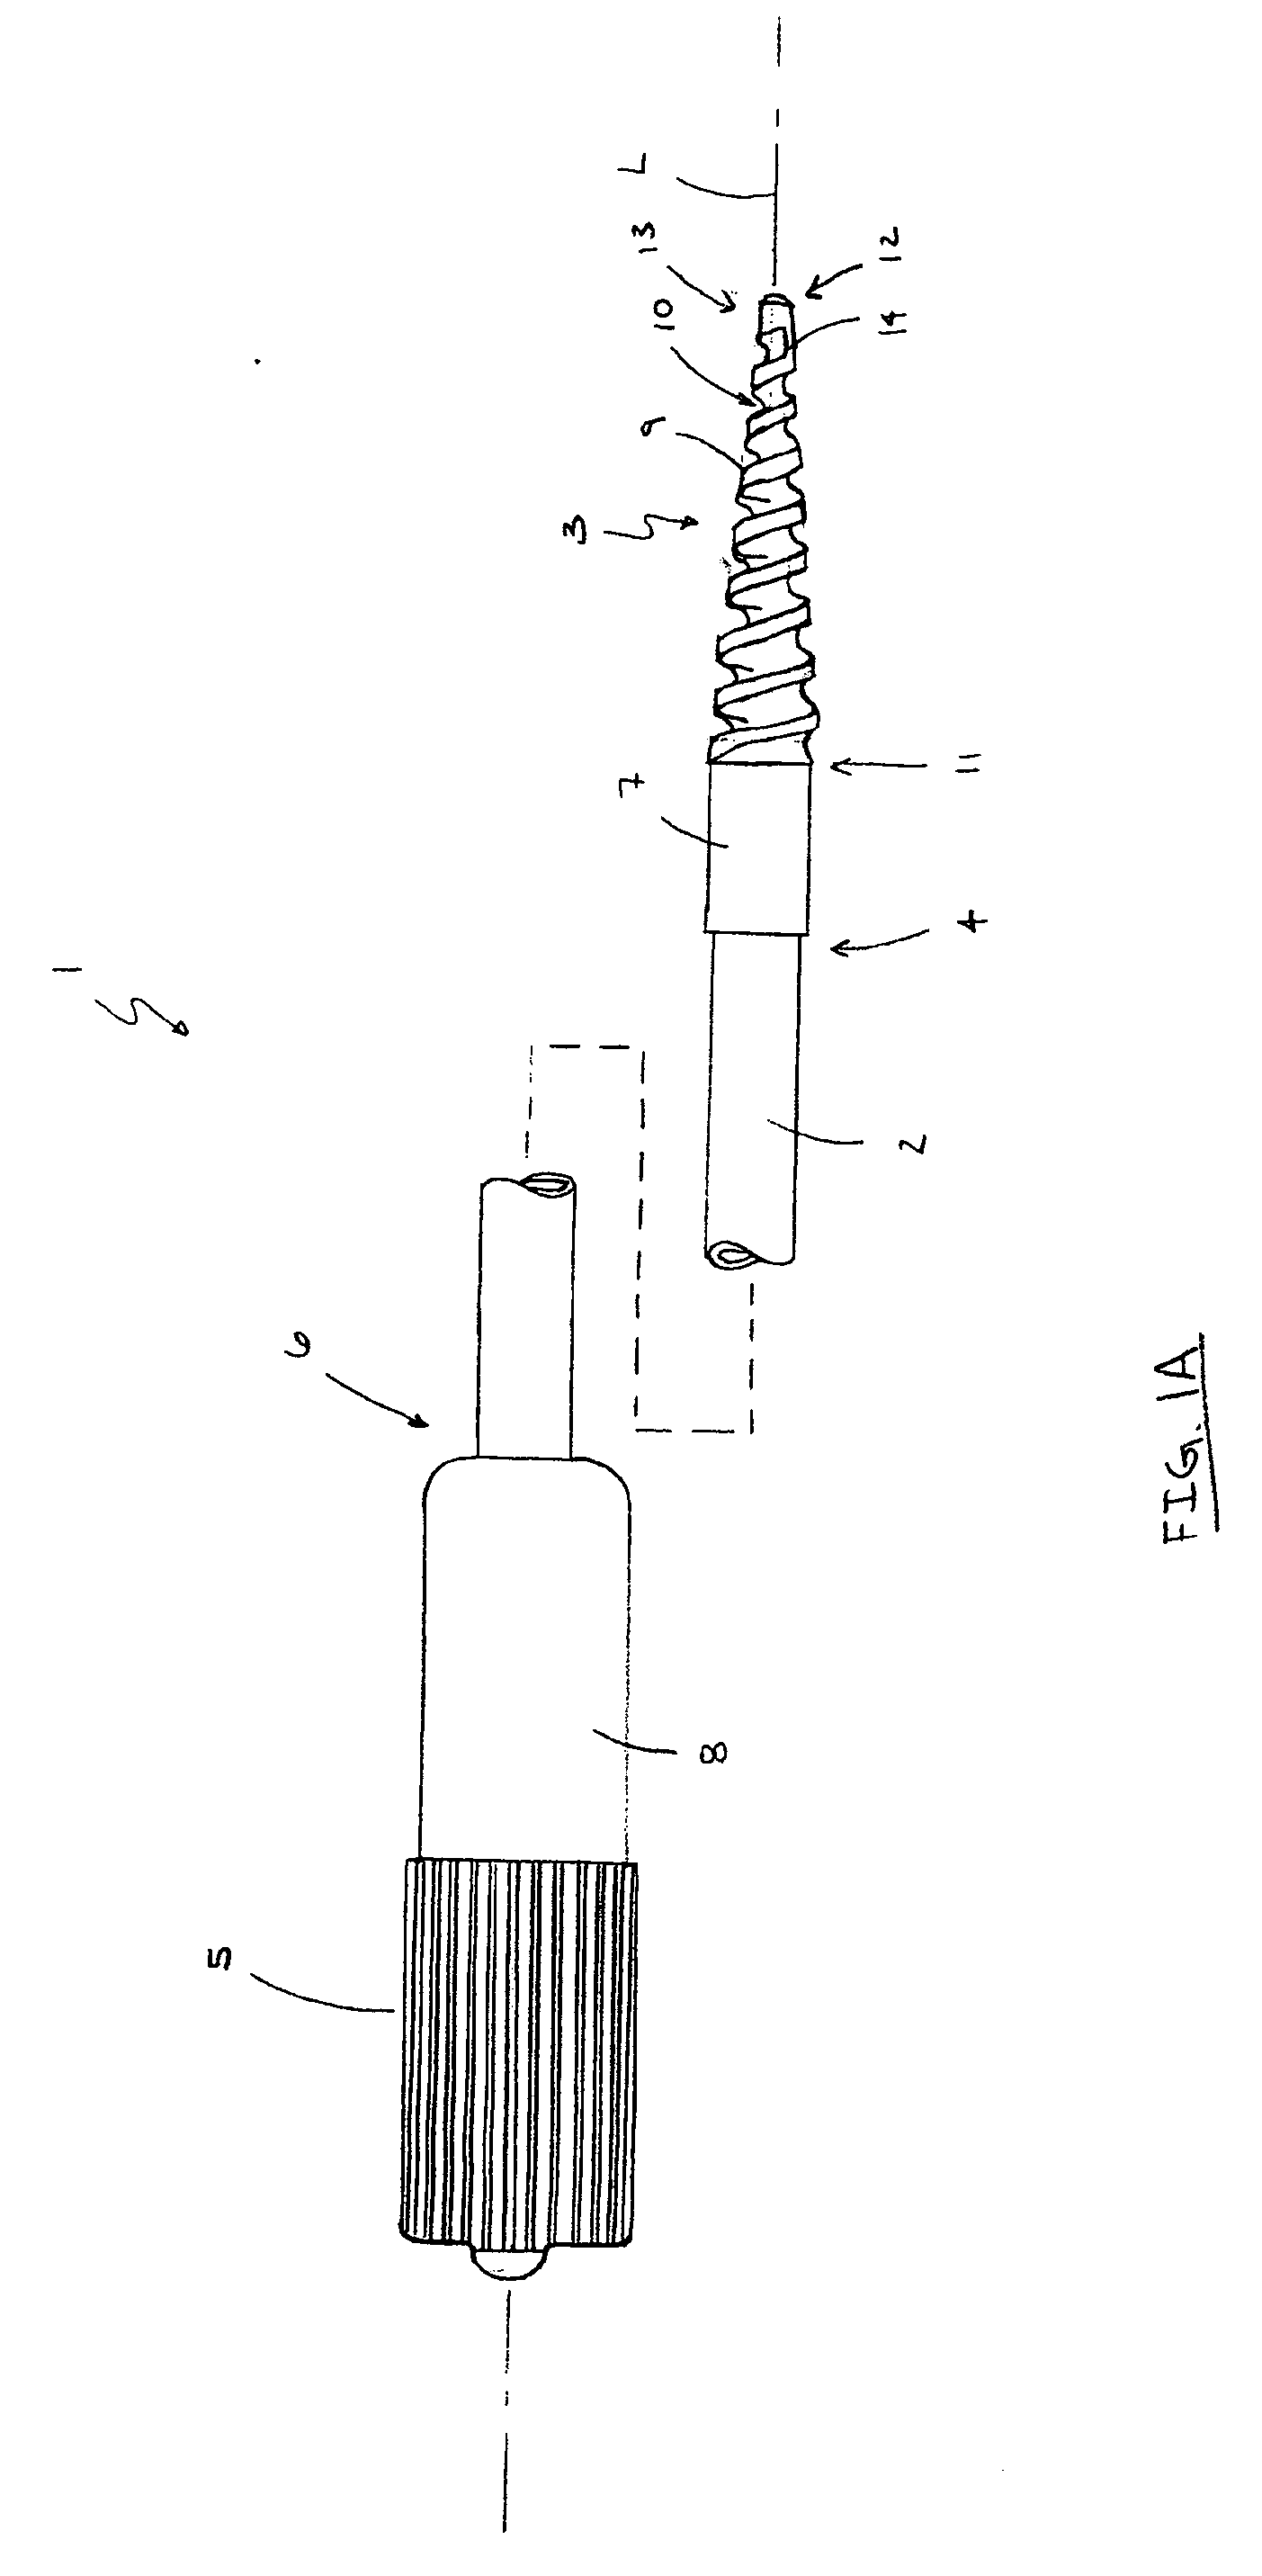 Cervical tissue biopsy system and methods of use